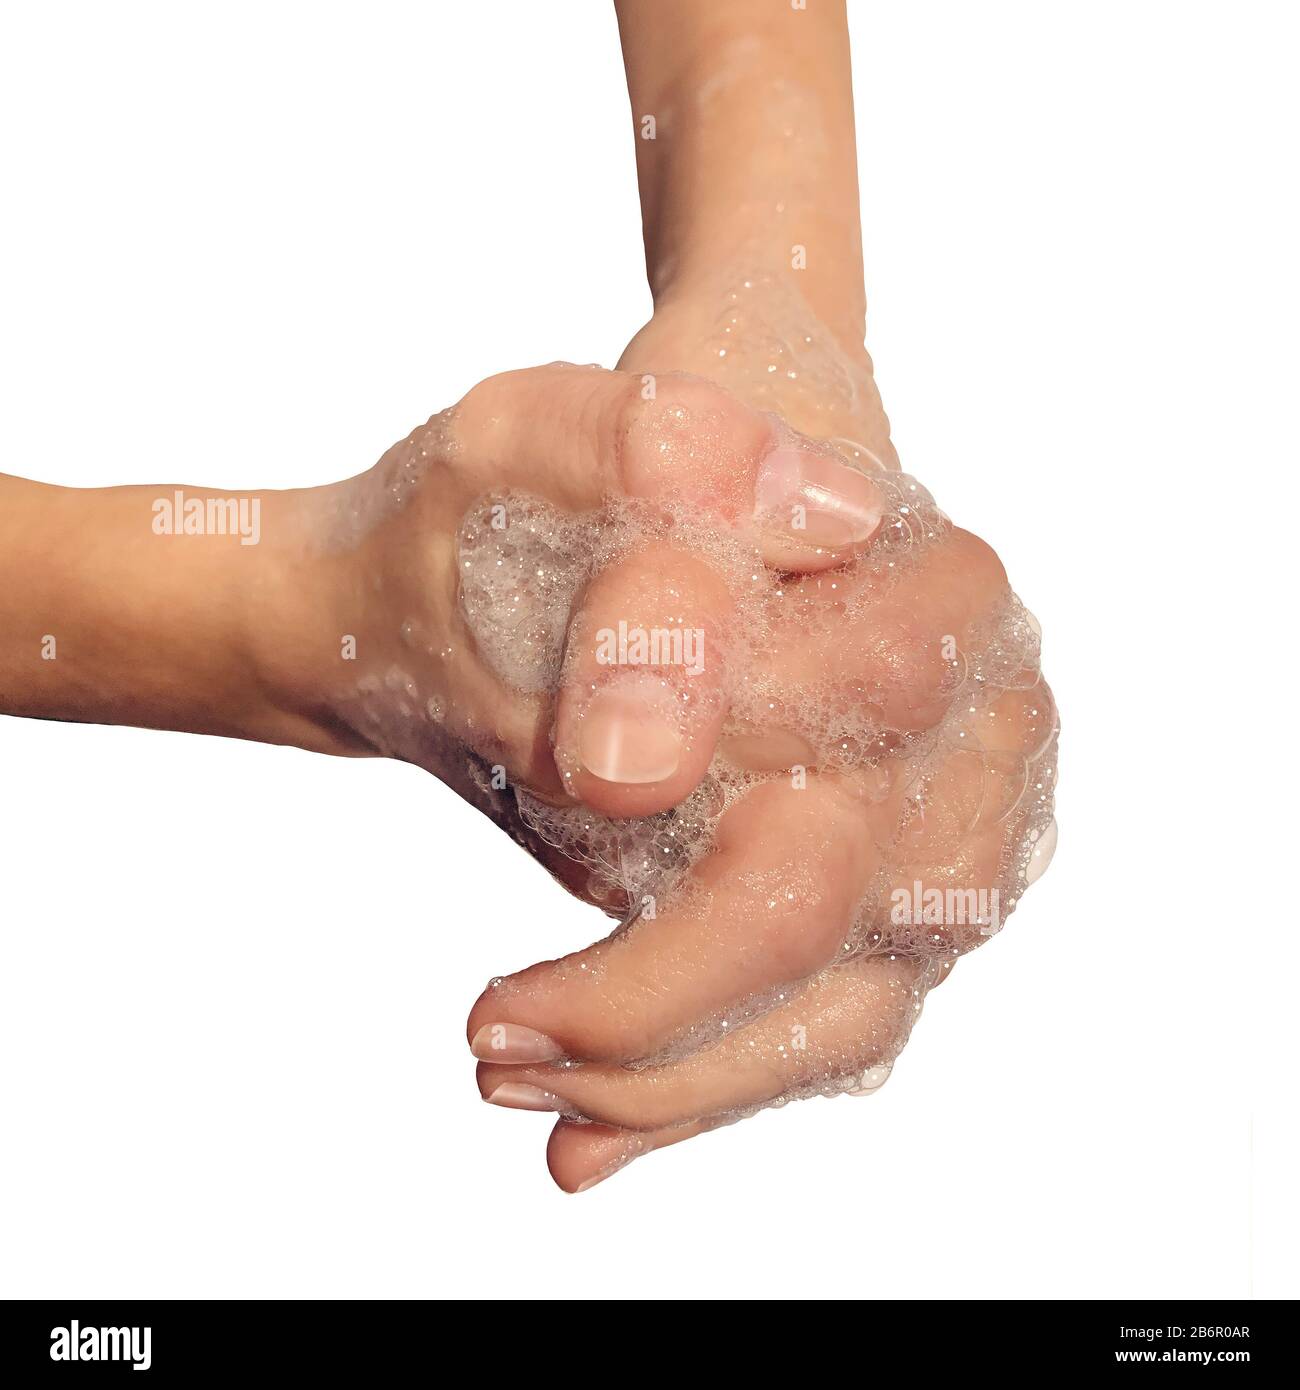 Hand washing hygiene using soap and water to clean dirty contaminated skin to avoid illness or the flu by handwashing and cleaning fingers. Stock Photo